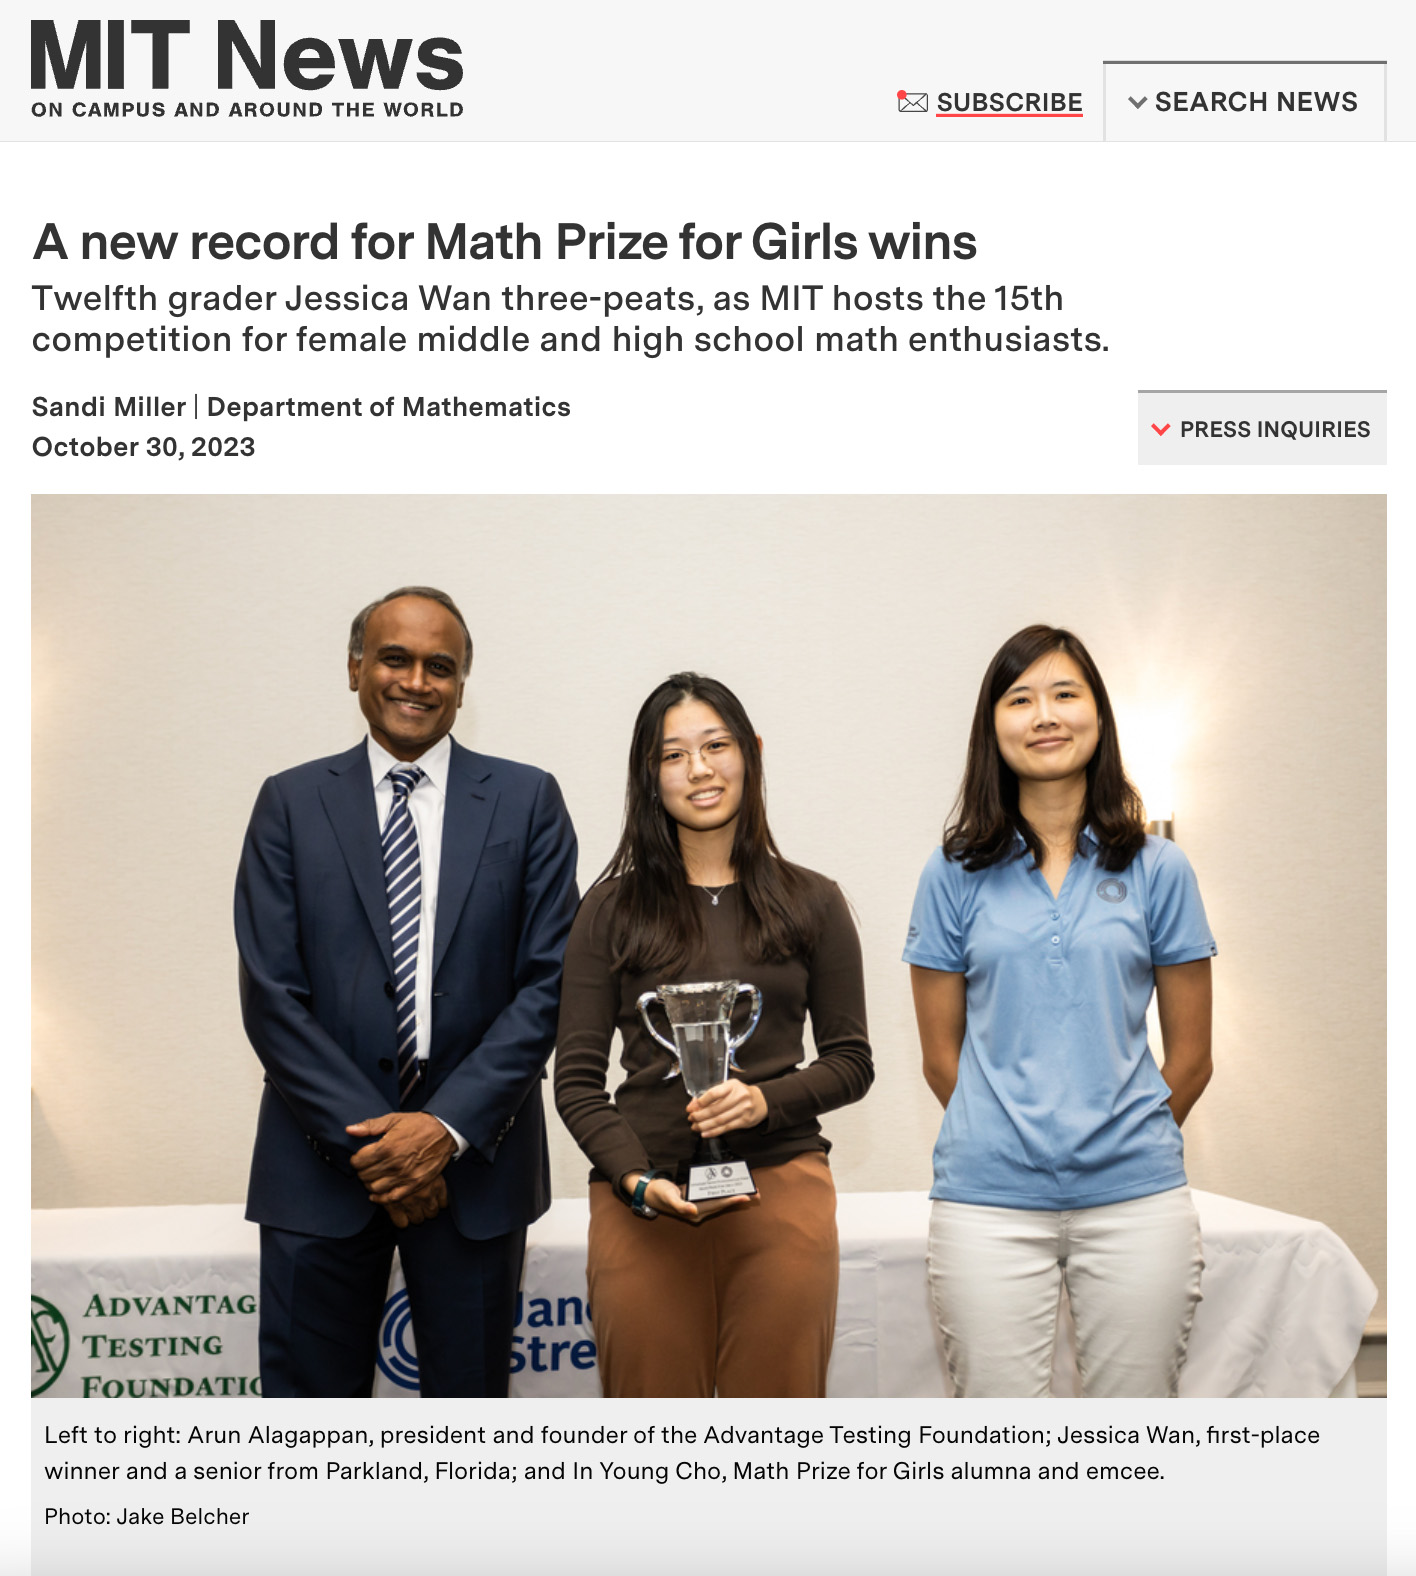 A new record for Math Prize for Girls wins